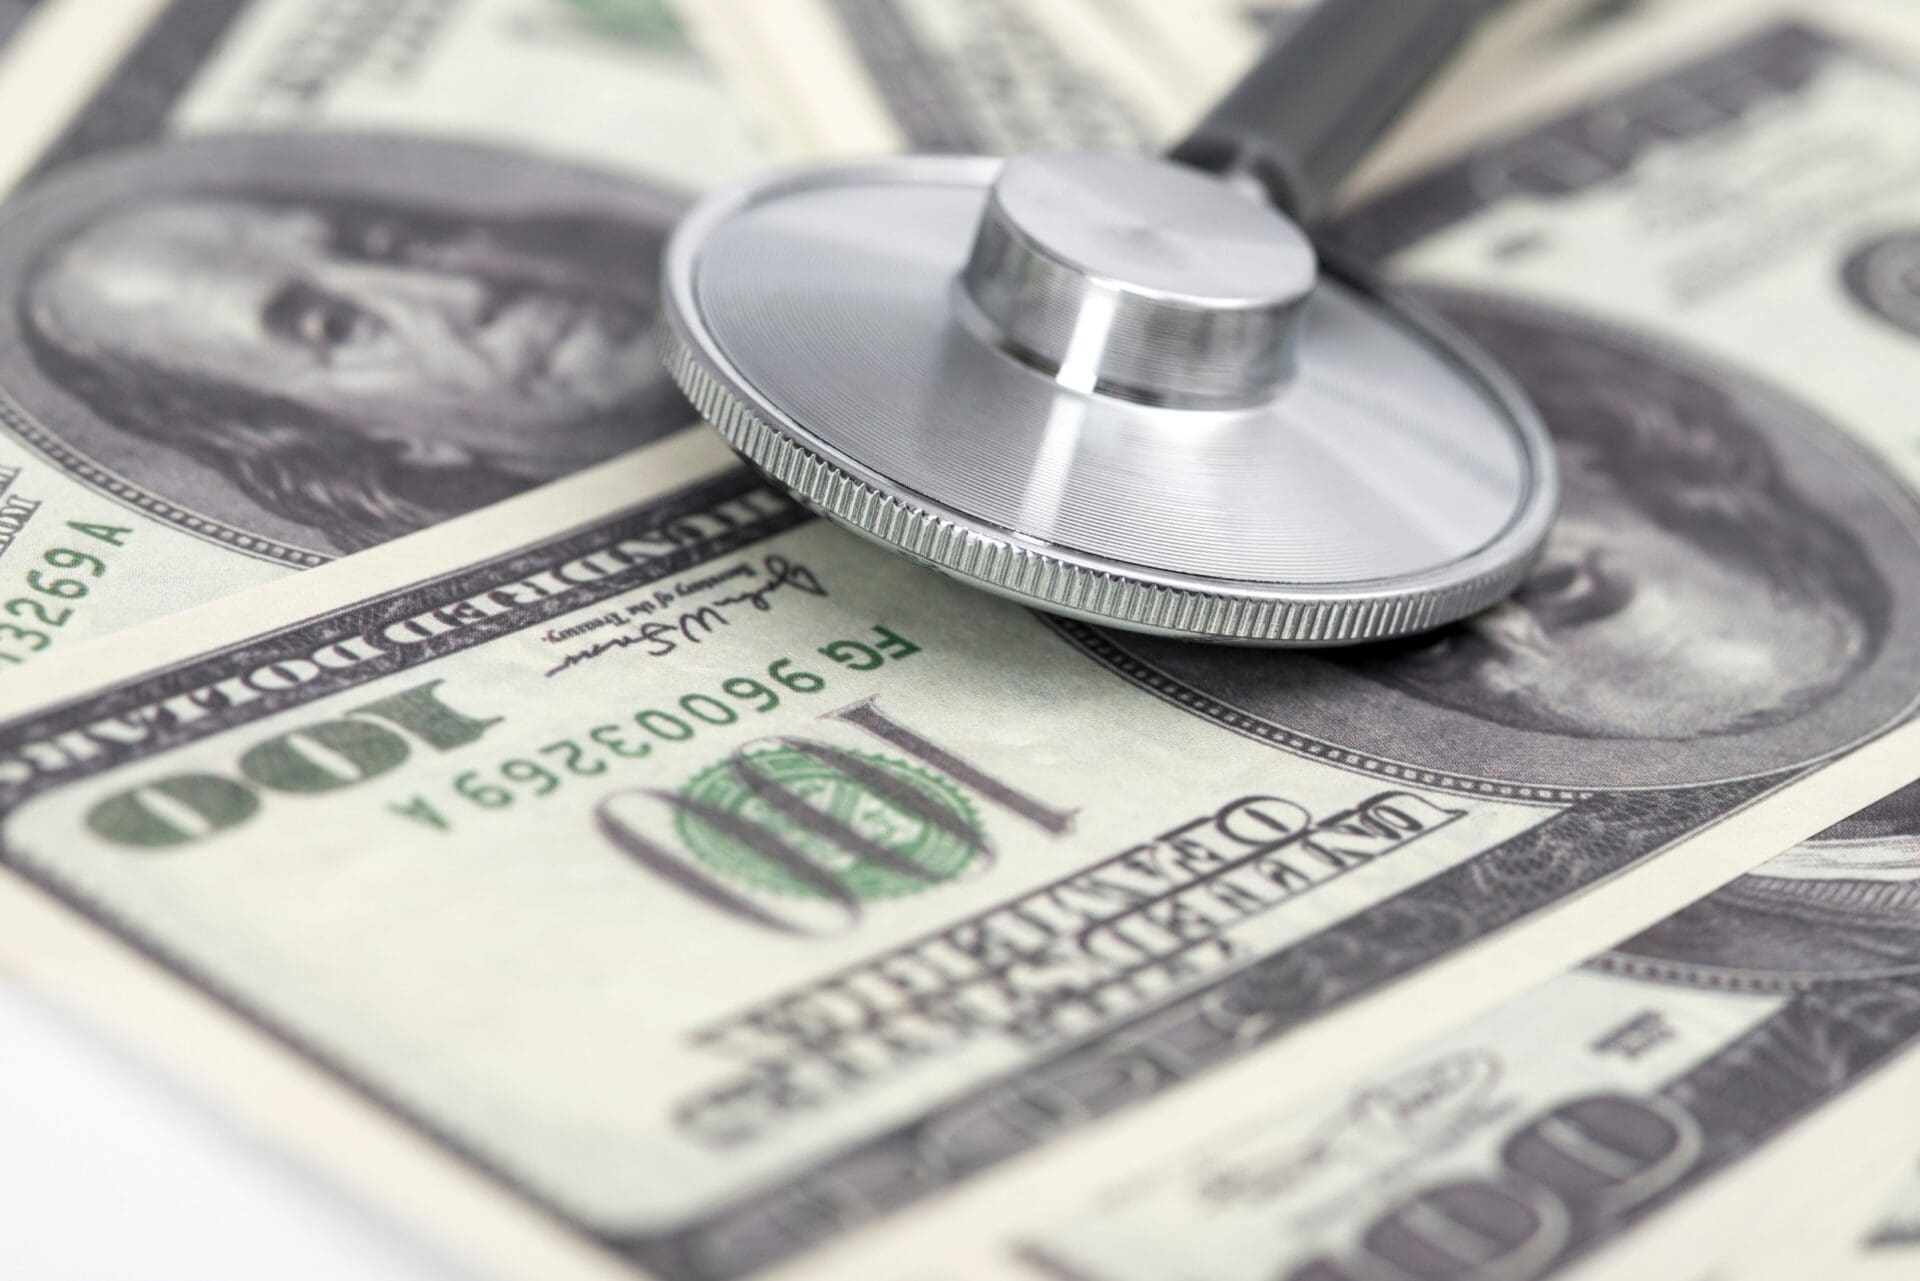 Stethoscope on the background of the dollar